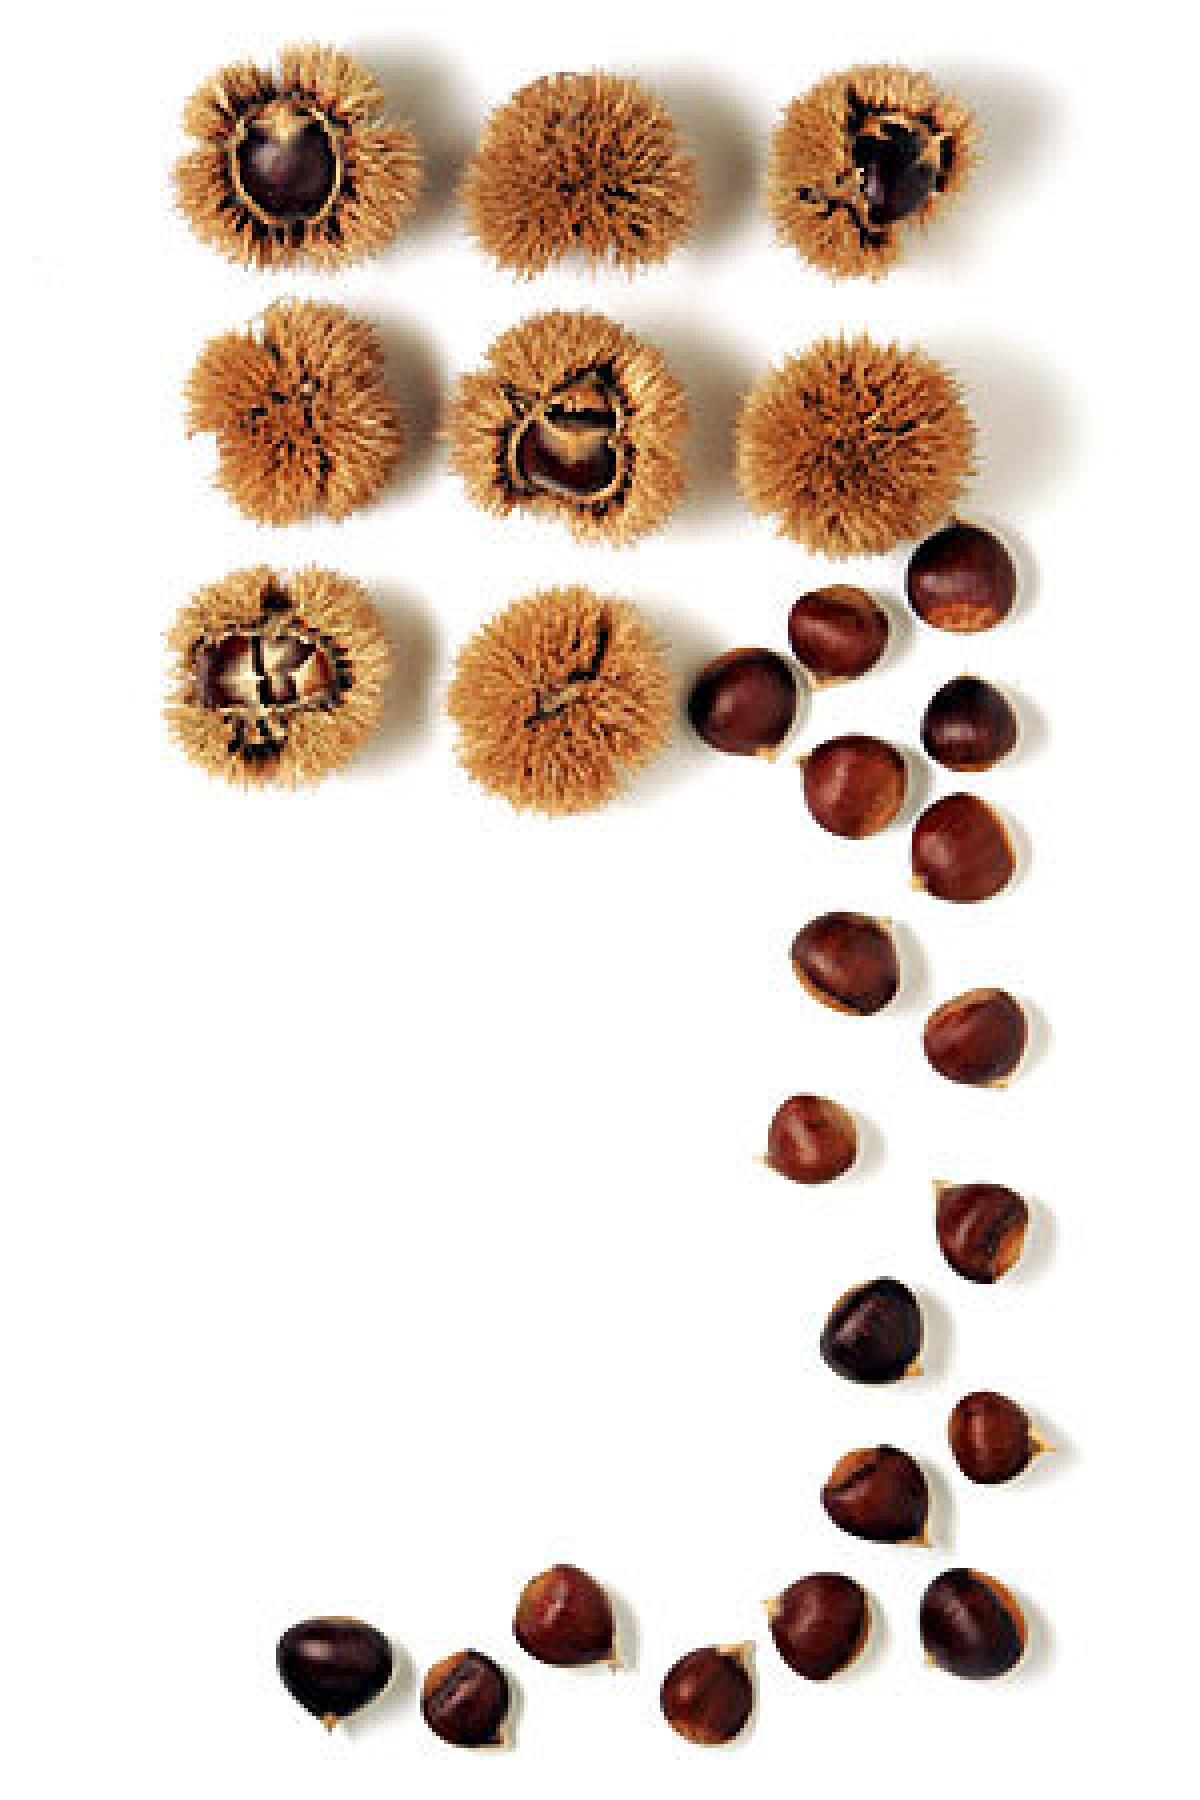 MEATY: During harvest, chestnuts shed their prickly outer skins, revealing a smooth interior.